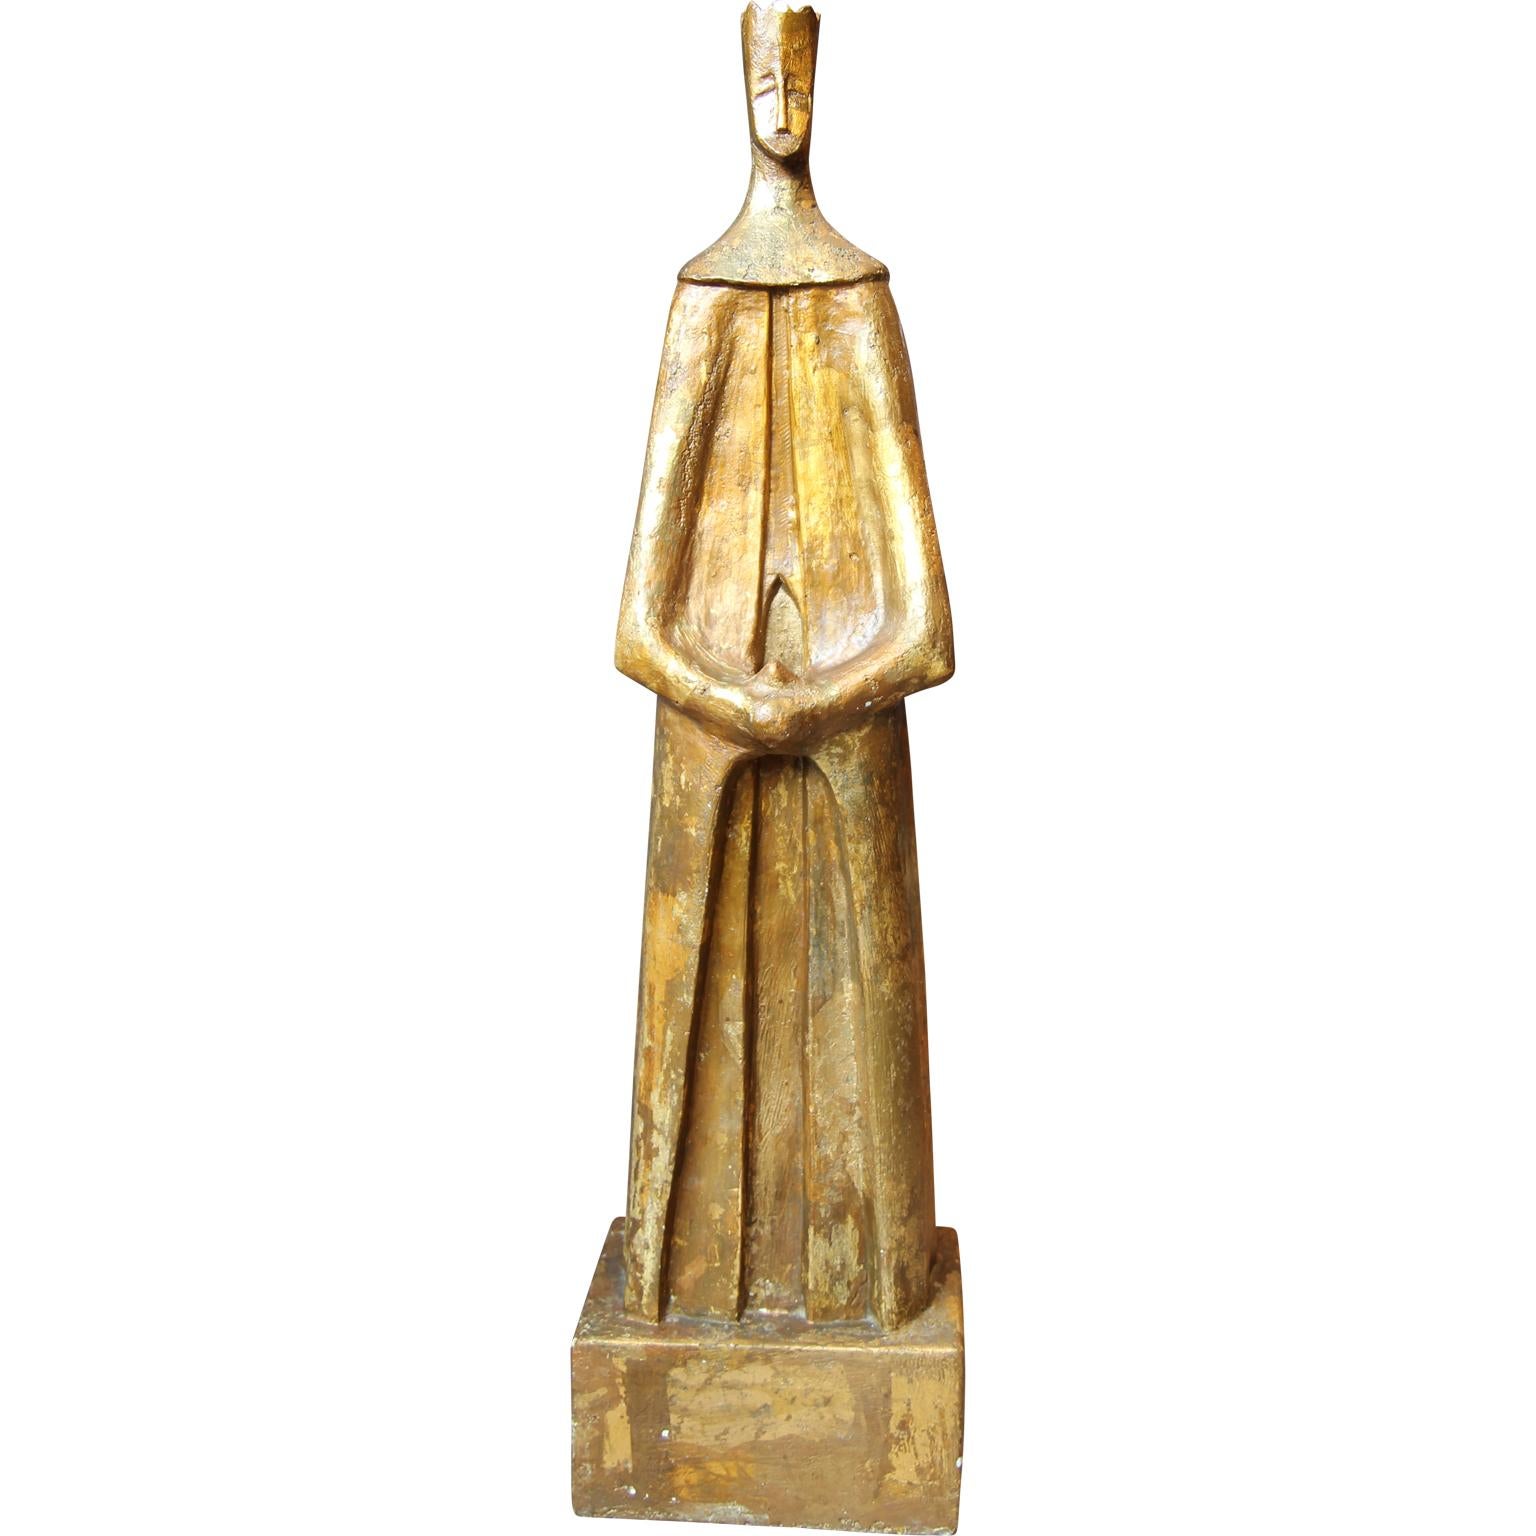 Unknown Abstract Sculpture - Abstract Gold King Statue with Patinaed Gold Leaf and Plaster 